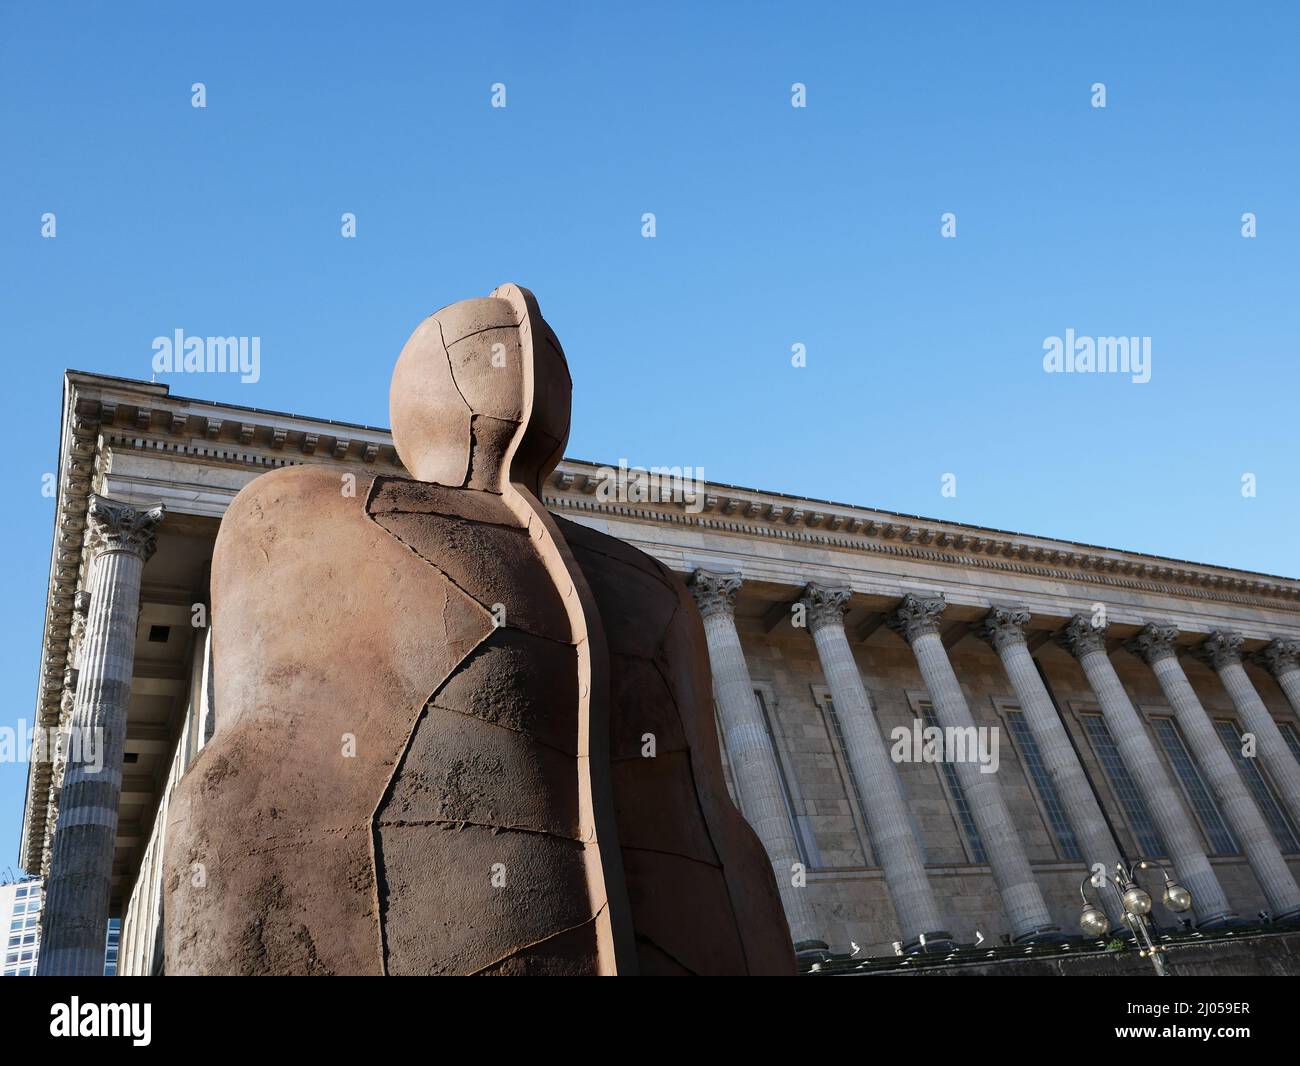 The Iron:Man sculpture by Antony Gormley. Reinstated during works in Victoria Square in preparation for the Birmingham 2022 Commonwealth Games. Stock Photo